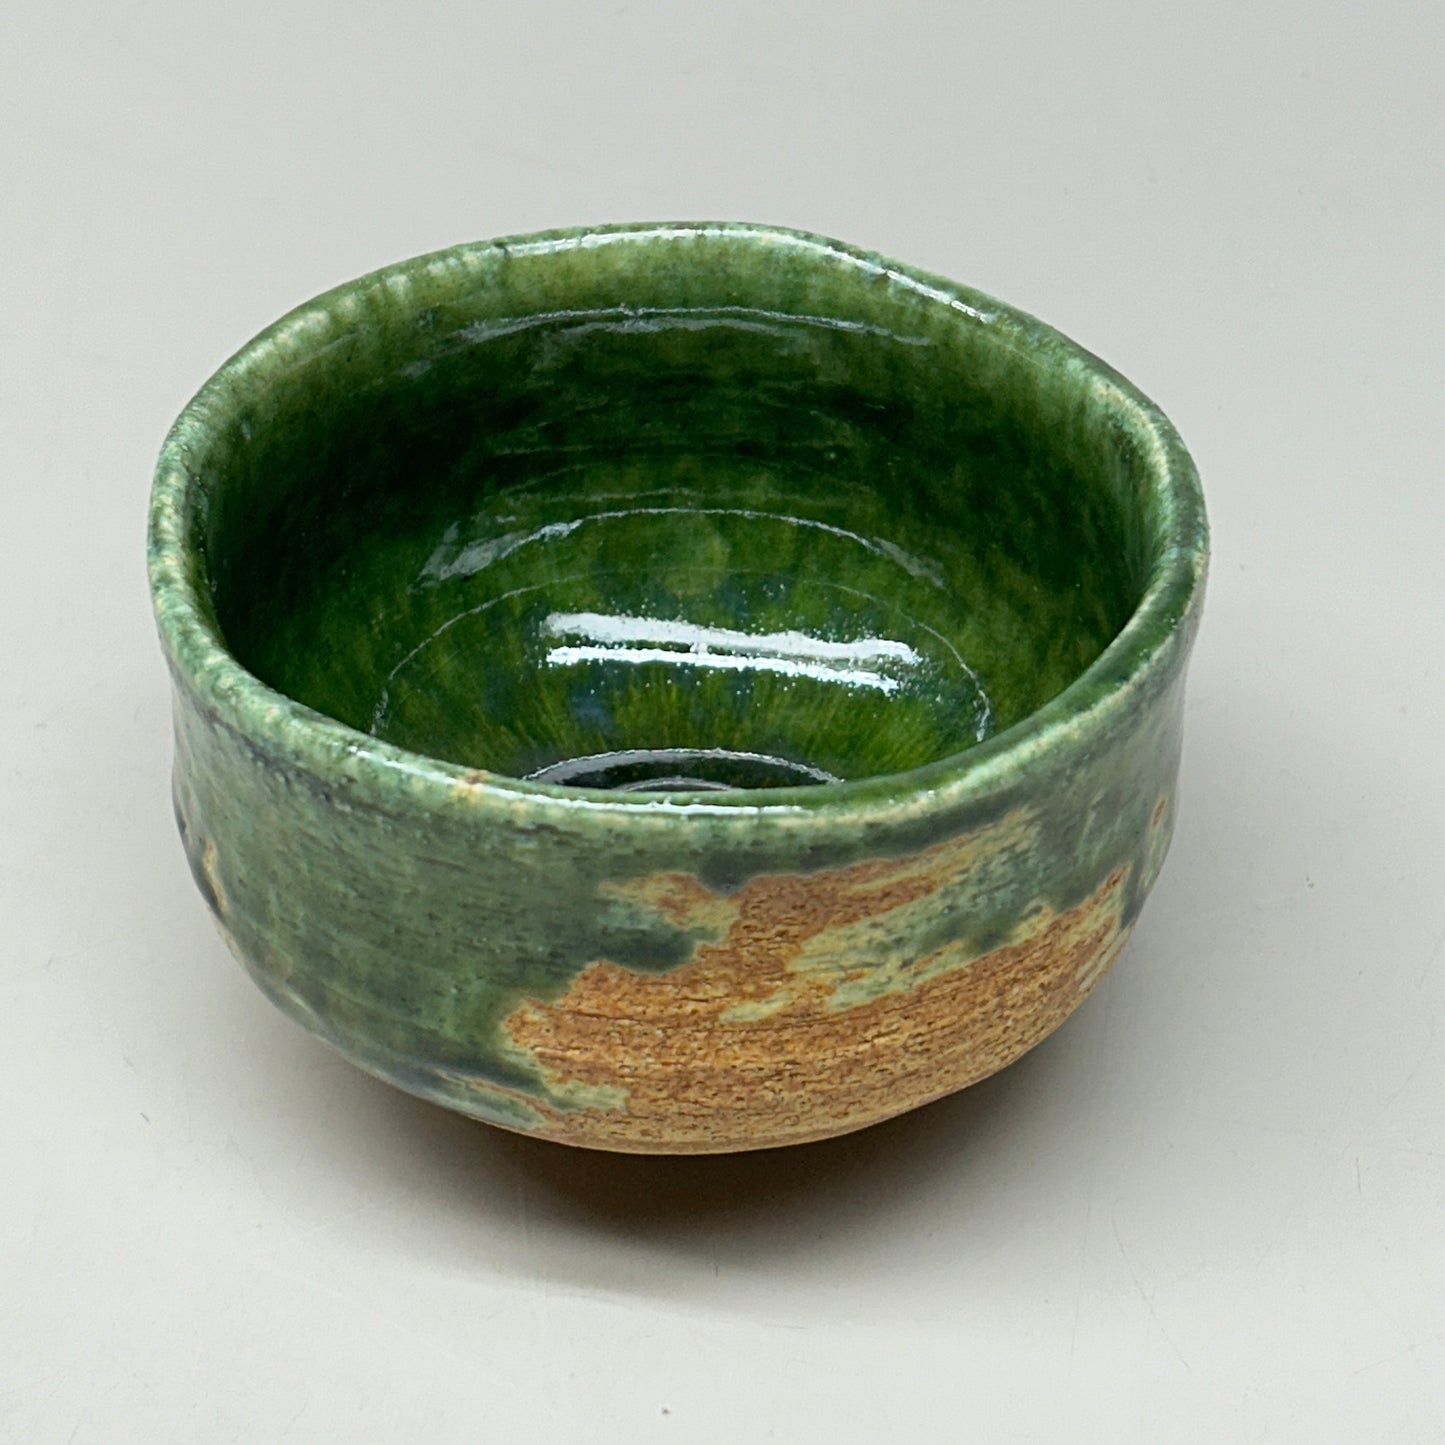 (6 PACK) Glazed Pottery Ceramic Bowls and Cups Green (New)